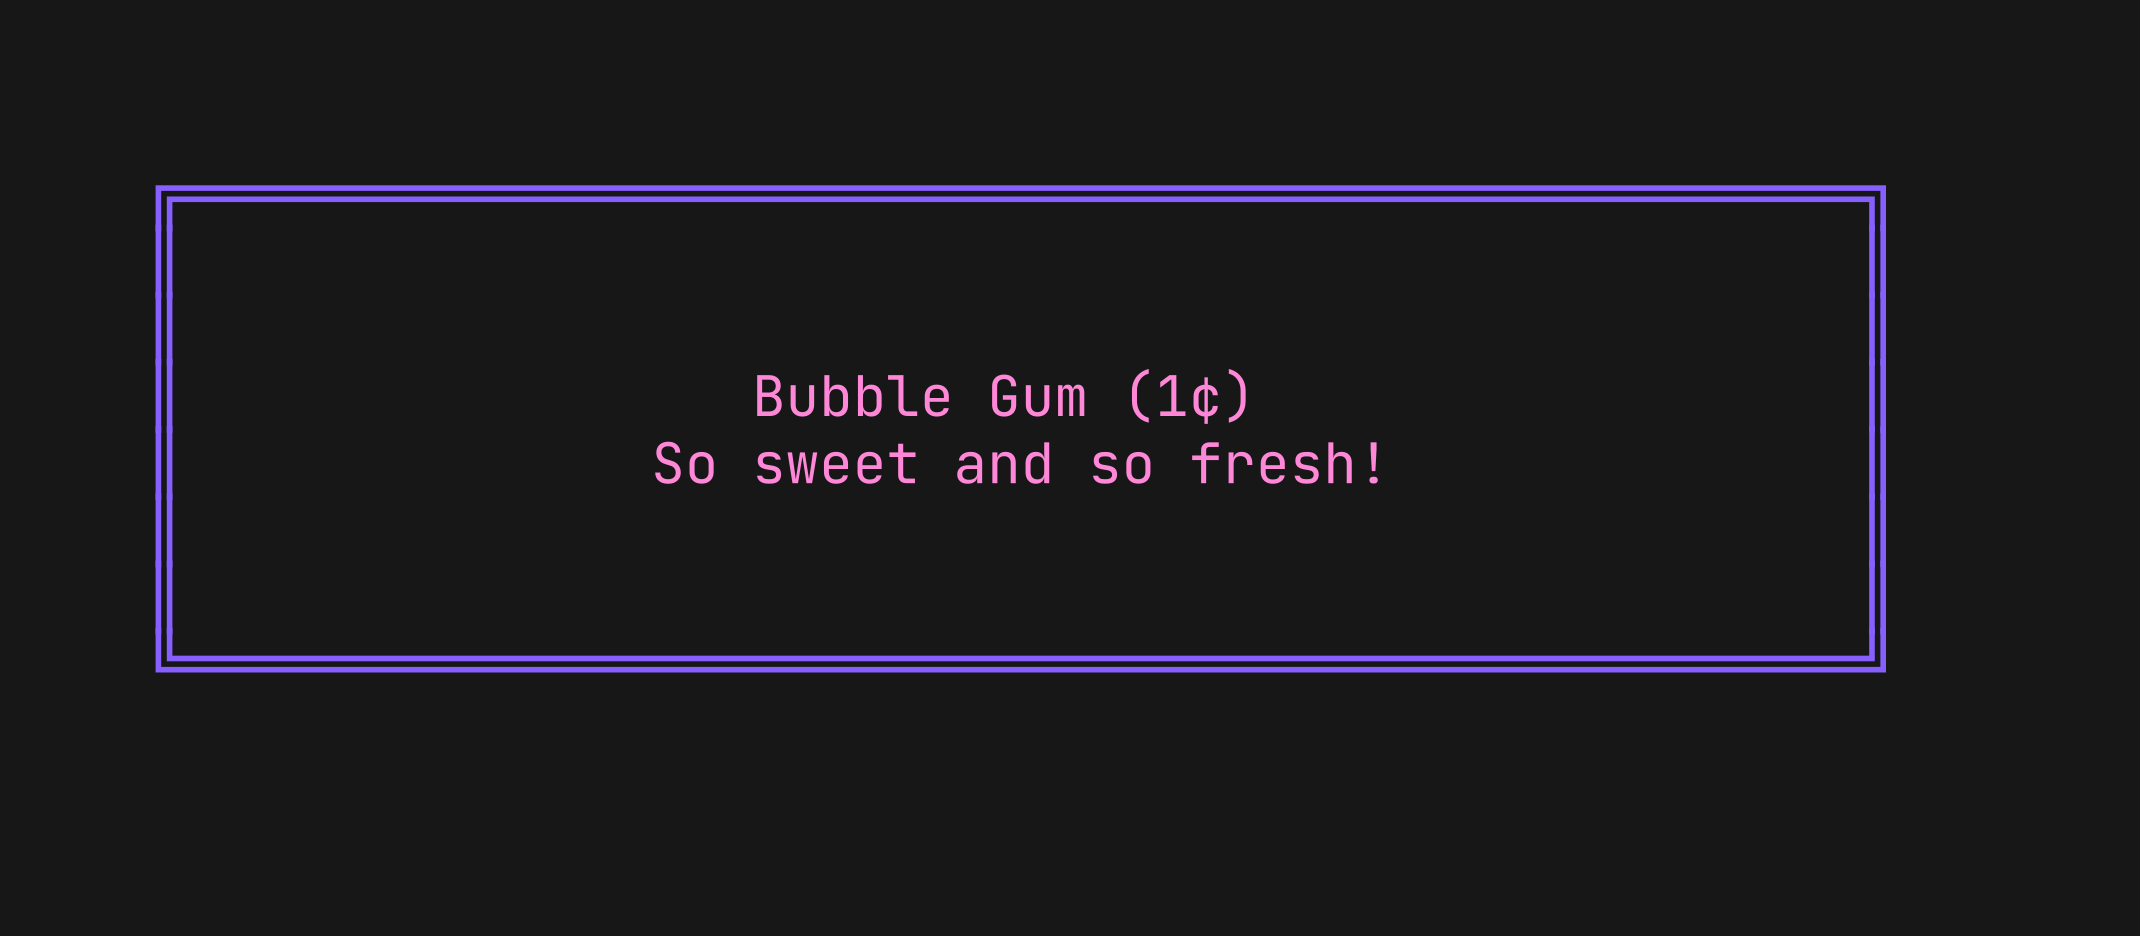 Bubble Gum, So sweet and so fresh!